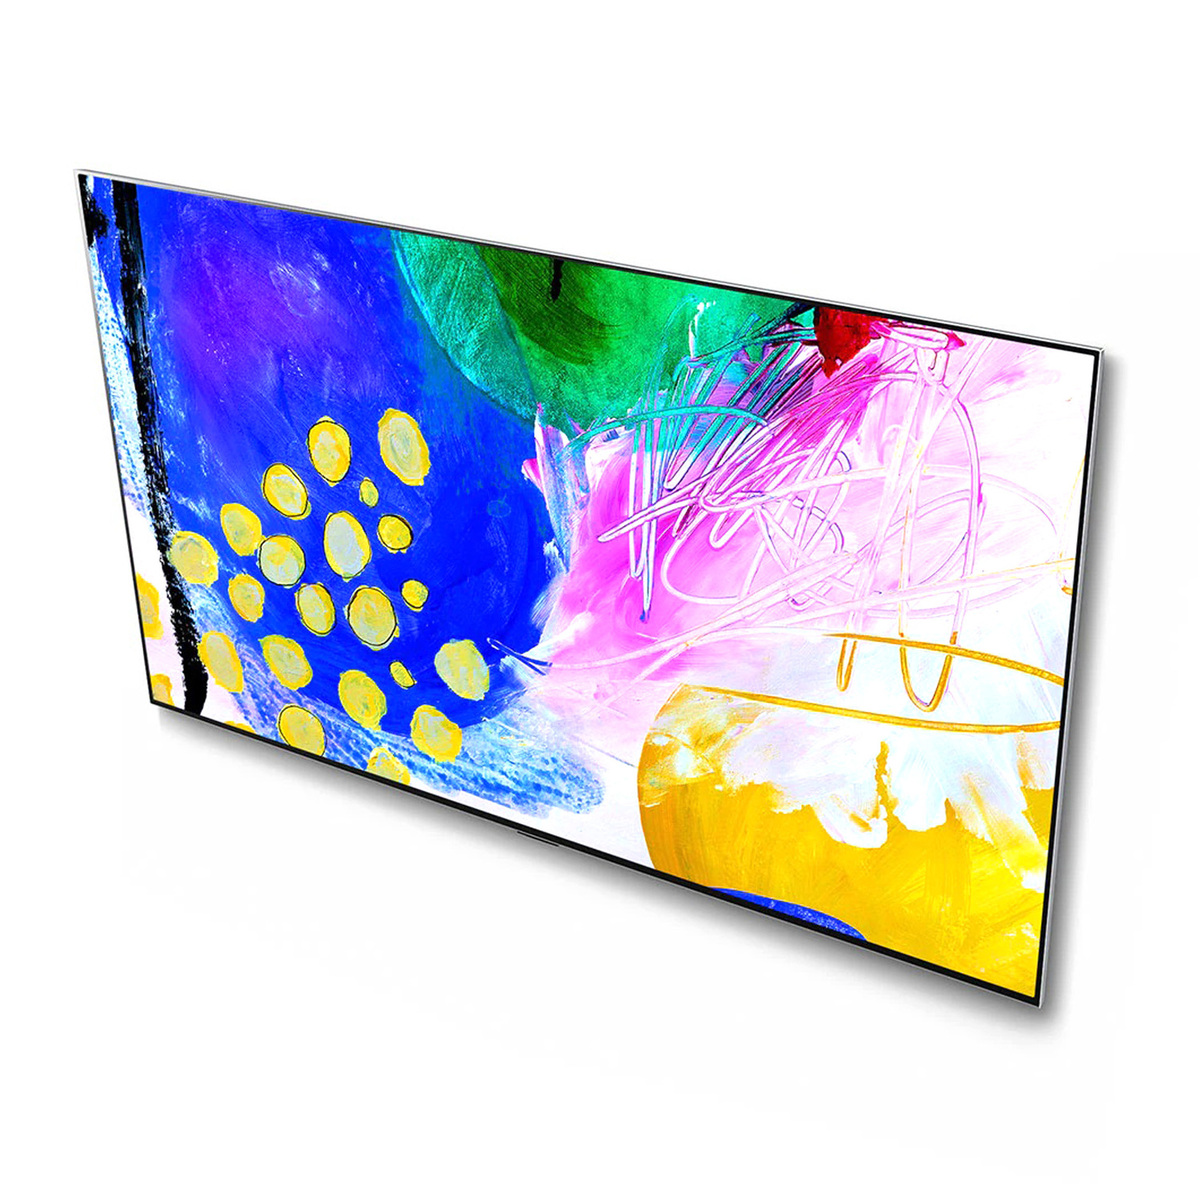 LG OLED evo TV 65 Inch G2 series, New 2022, Gallery Design 4K Cinema HDR webOS22 with ThinQ AI Pixel Dimming - OLED65G26LA